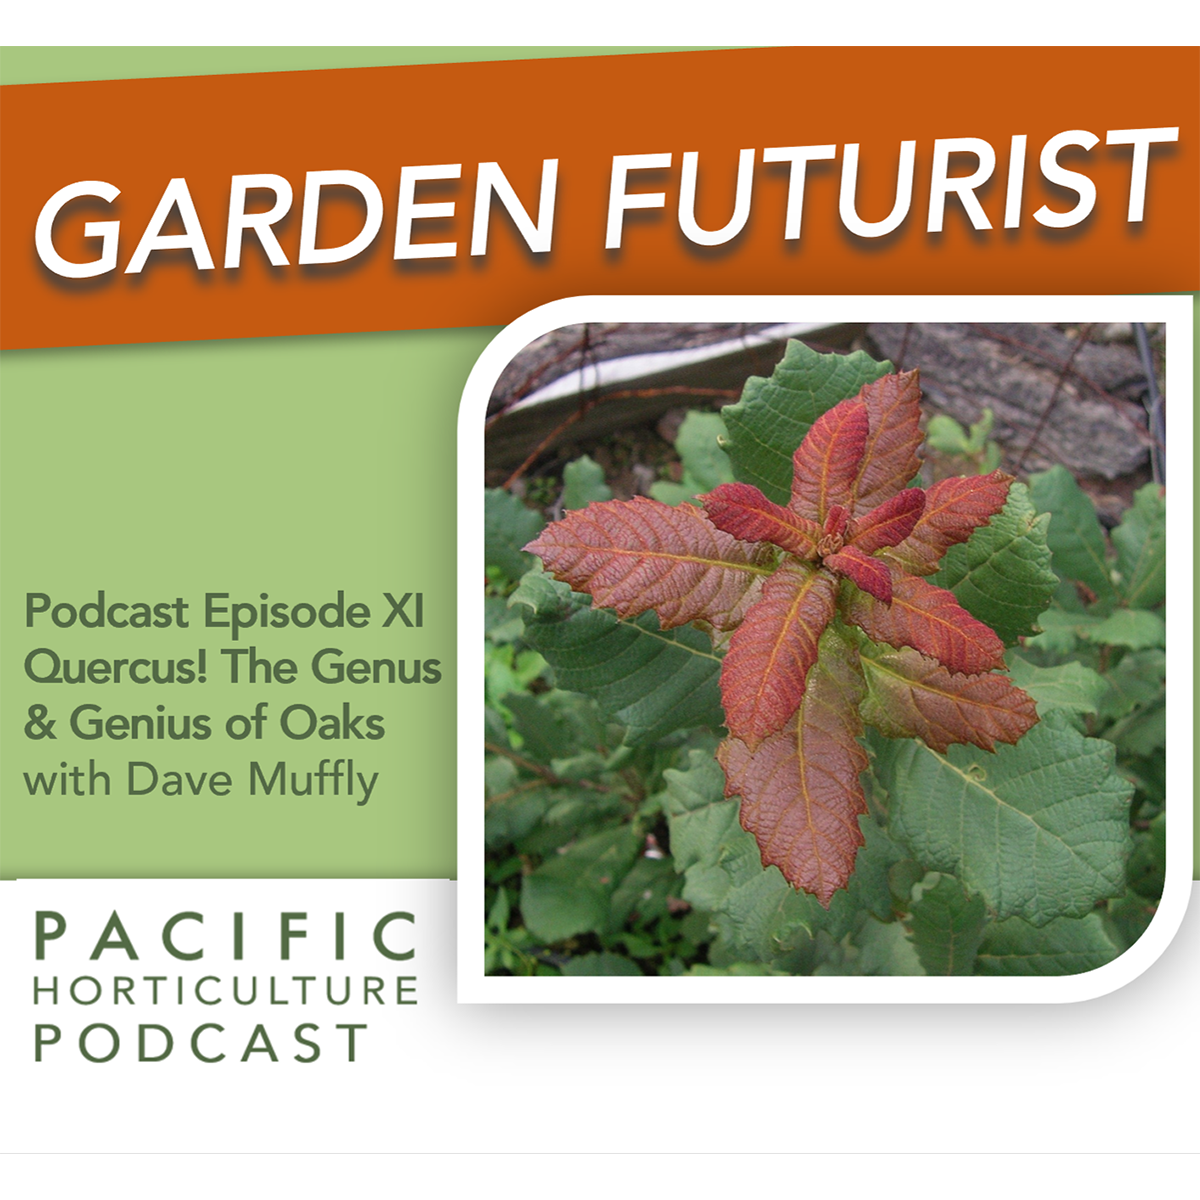 Episode XI: Quercus! genus and genius of Oaks with Dave Muffly